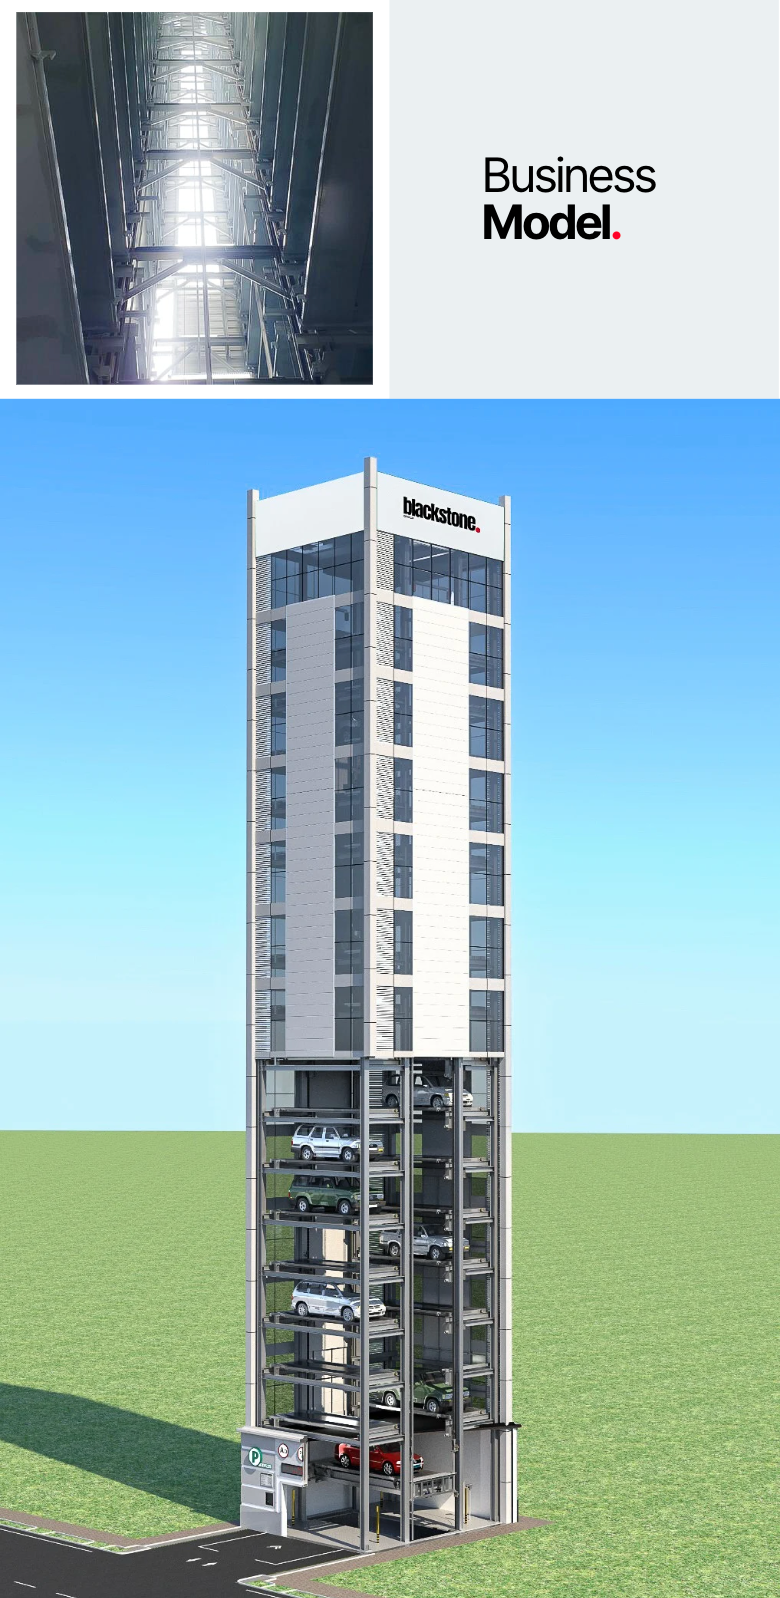 E-Park Tower operates entirely autonomously, requiring no human assistance for parking operations, which significantly reduces labor costs. It features advanced solar panels that generate 80% more electricity. Excess power is stored in batteries, ensuring operational efficiency and reduced energy costs around the clock.